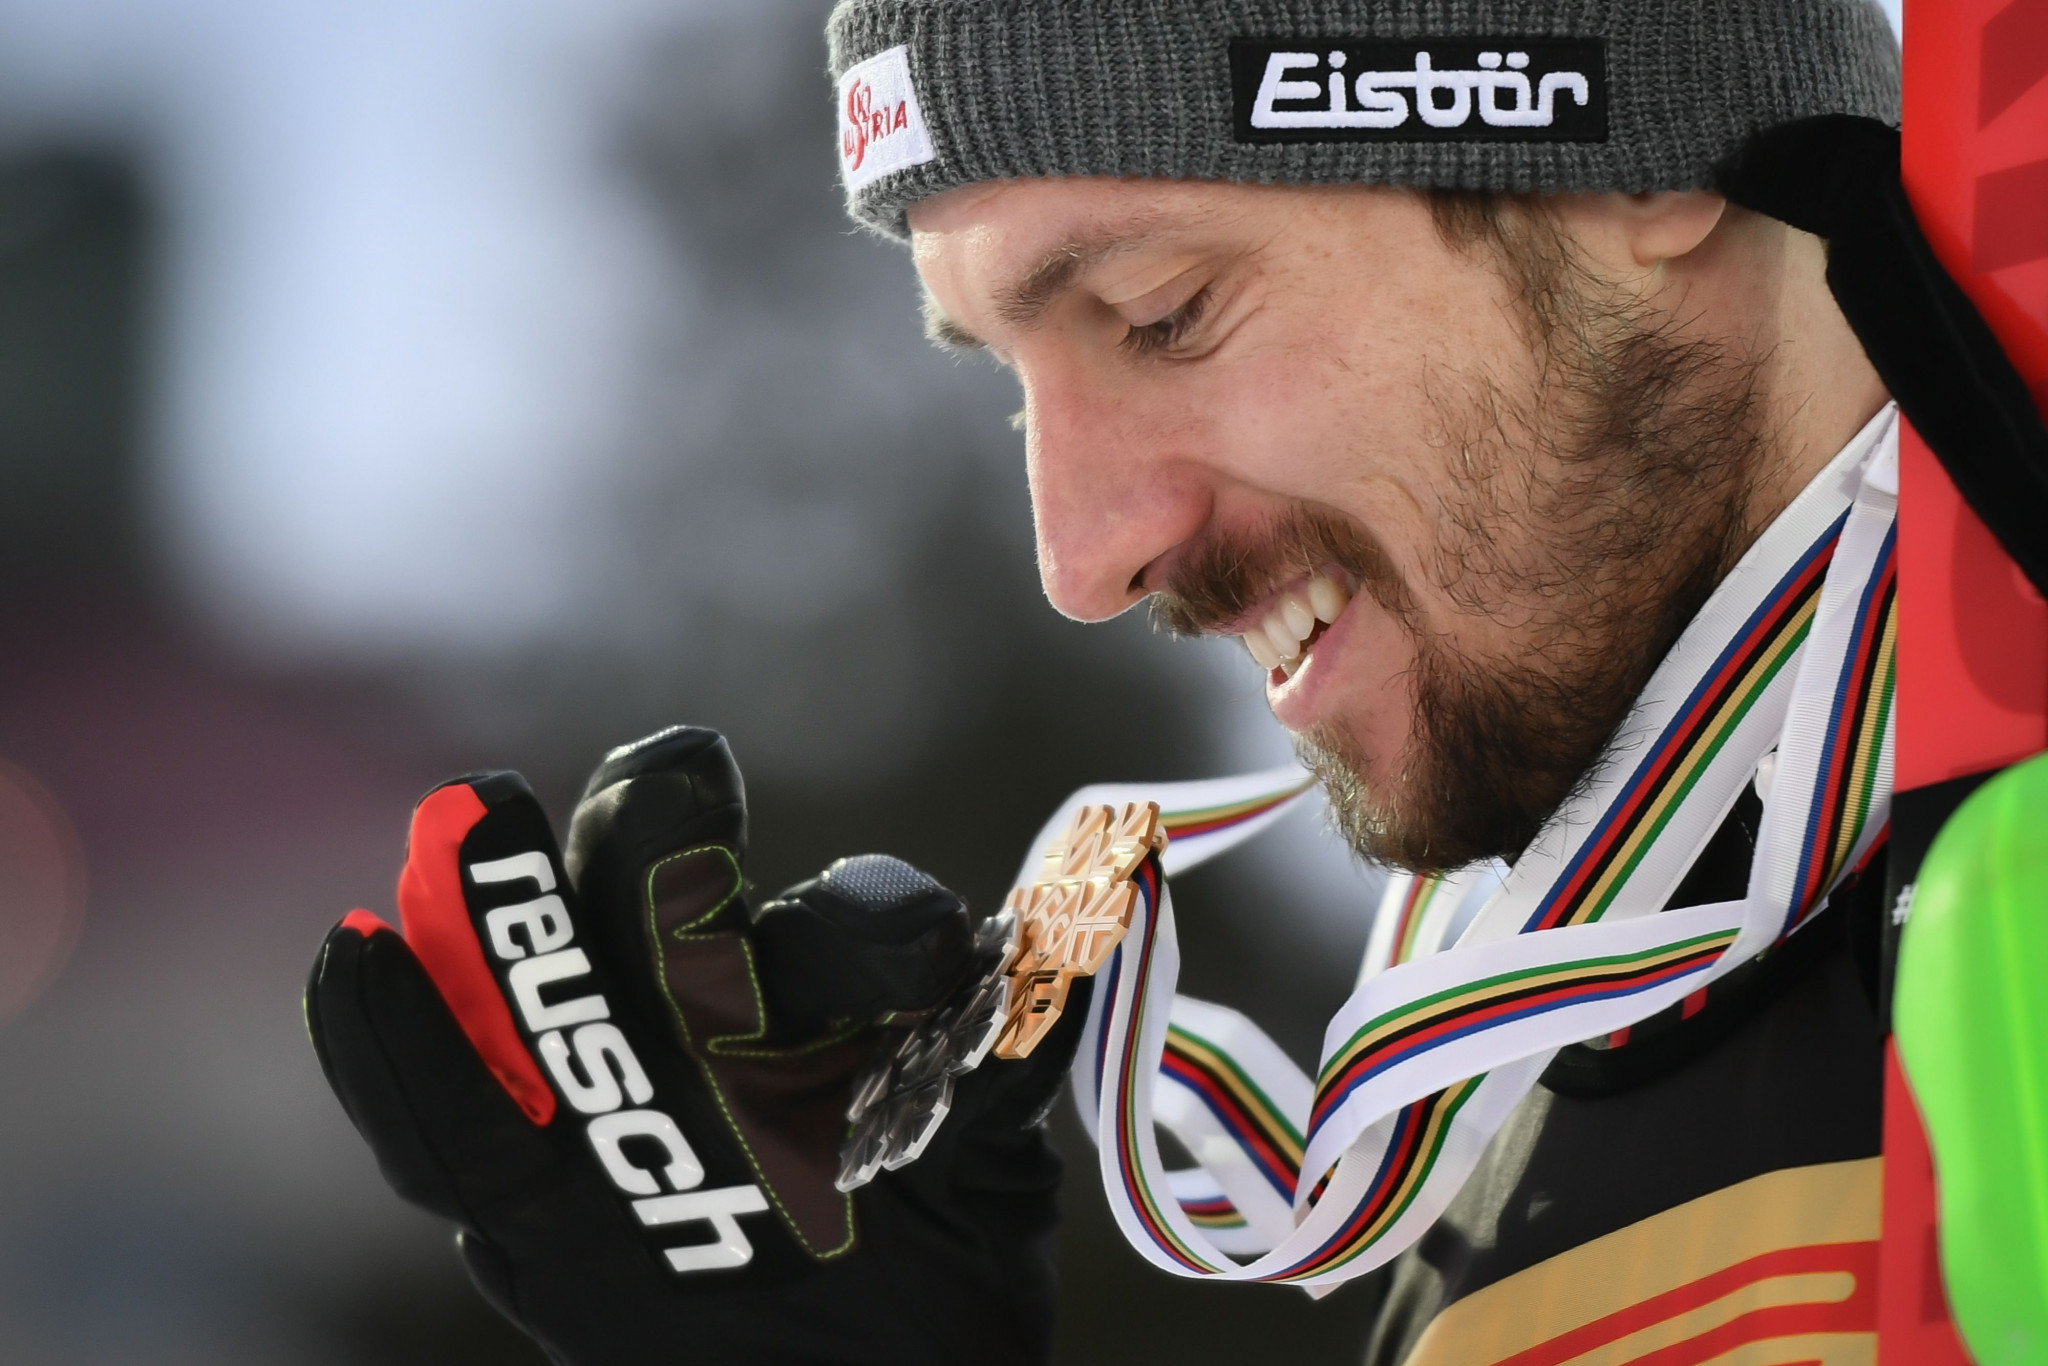 Hirscher's victory gave Austria their first gold medal of the Championships ©Getty Images